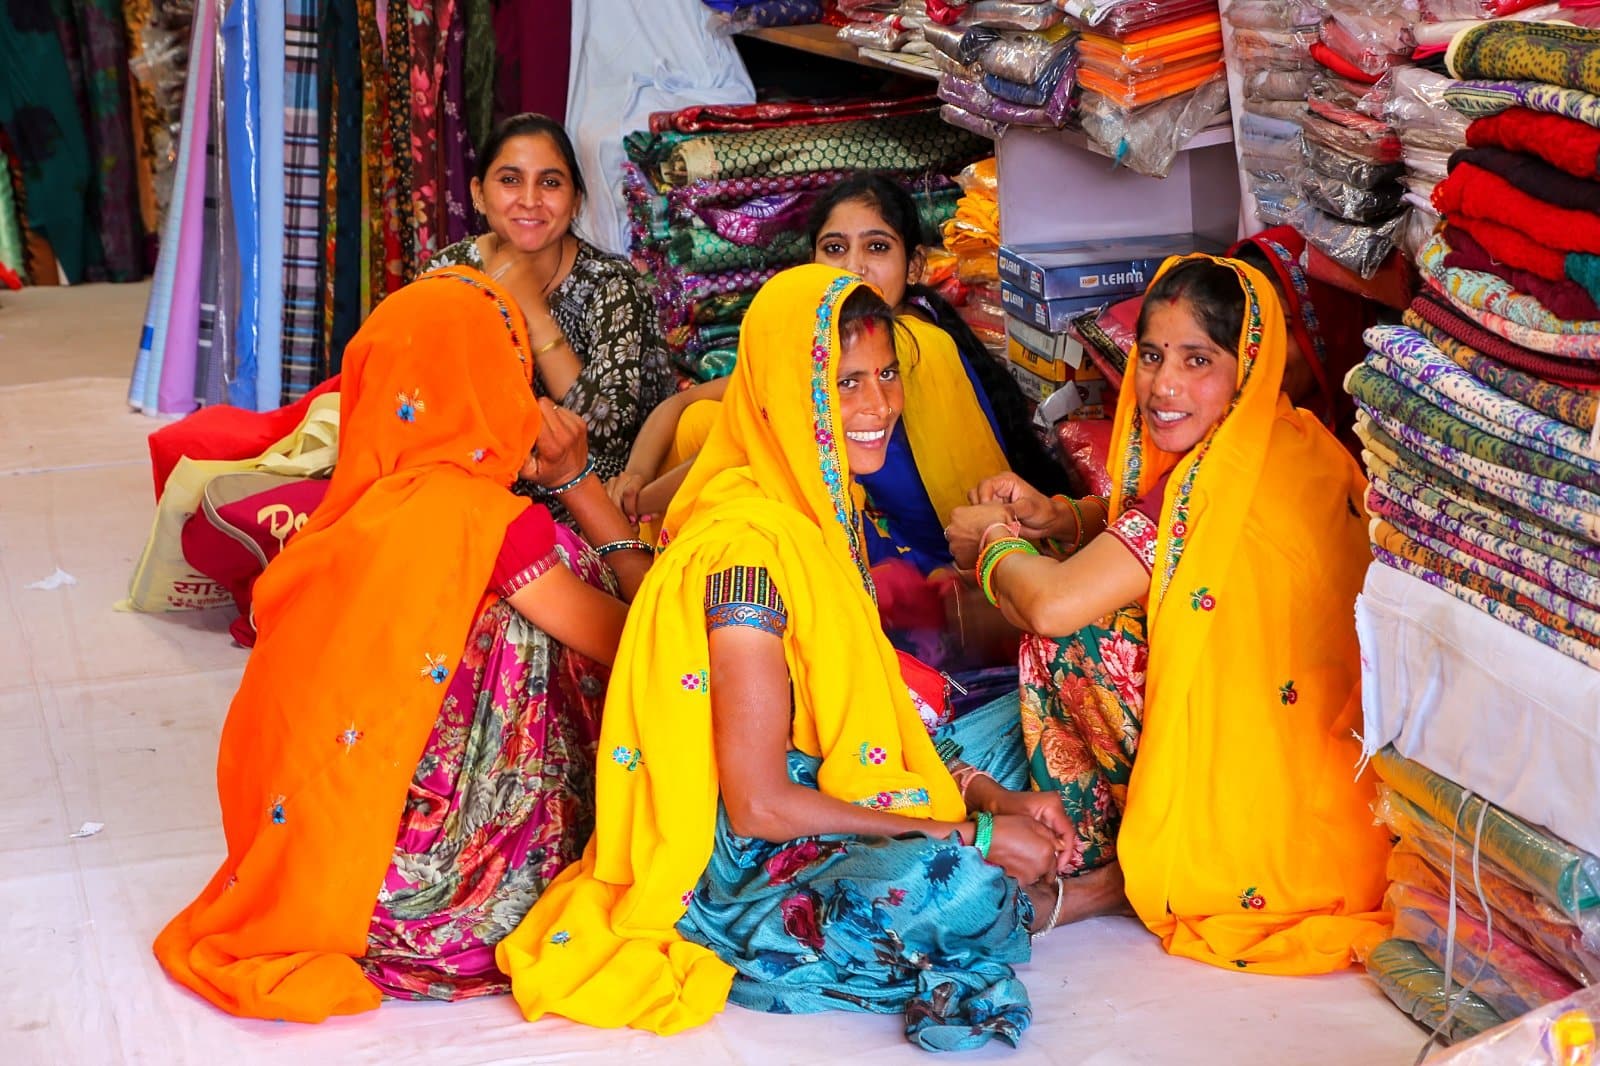 <p class="wp-caption-text">Image Credit: Shutterstock / Don Mammoser</p>  <p><span>Jaipur, known as the Pink City, is famous for its historic forts and palaces and its vibrant markets. These bazaars are alive with a riot of colors, offering everything from traditional Rajasthani jewelry and textiles to various handicrafts. The Johari Bazaar is renowned for its exquisite gemstones and jewelry, while the Bapu Bazaar is the go-to place for Rajasthani juttis (traditional leather shoes), scarves, and textiles.</span></p>